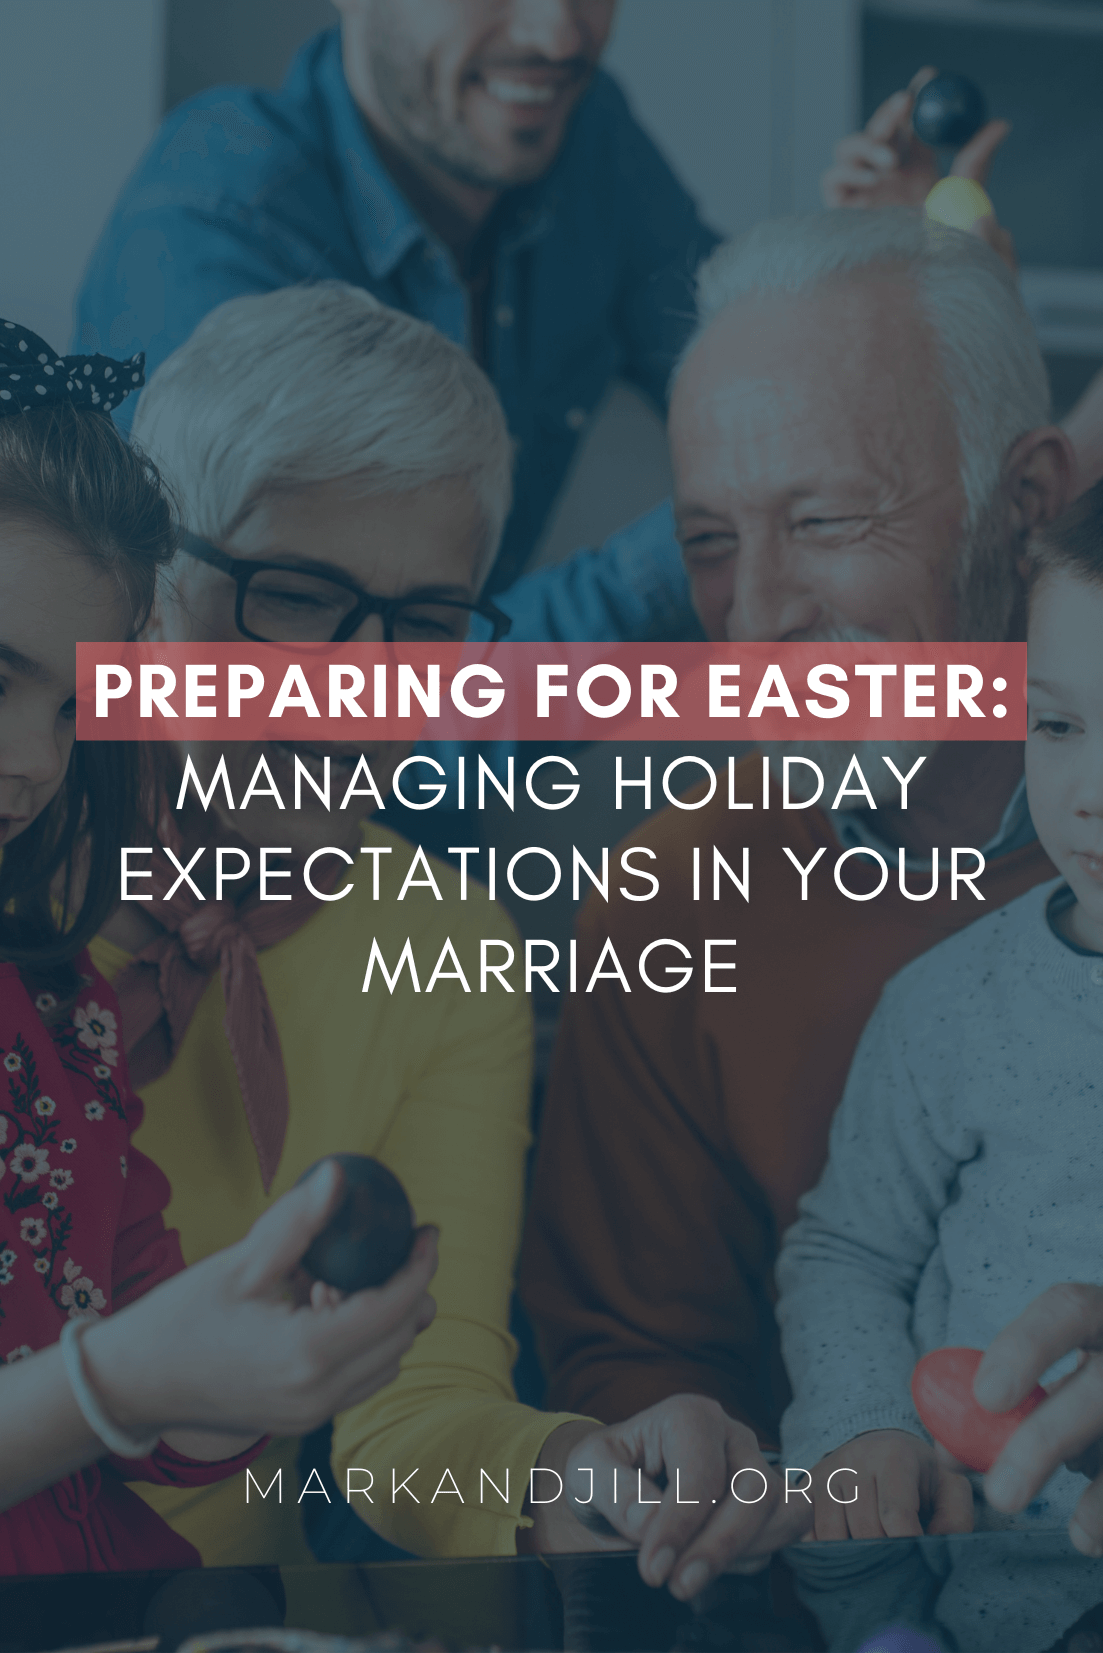 Preparing for Easter: Managing Holiday Expectations in Your Marriage